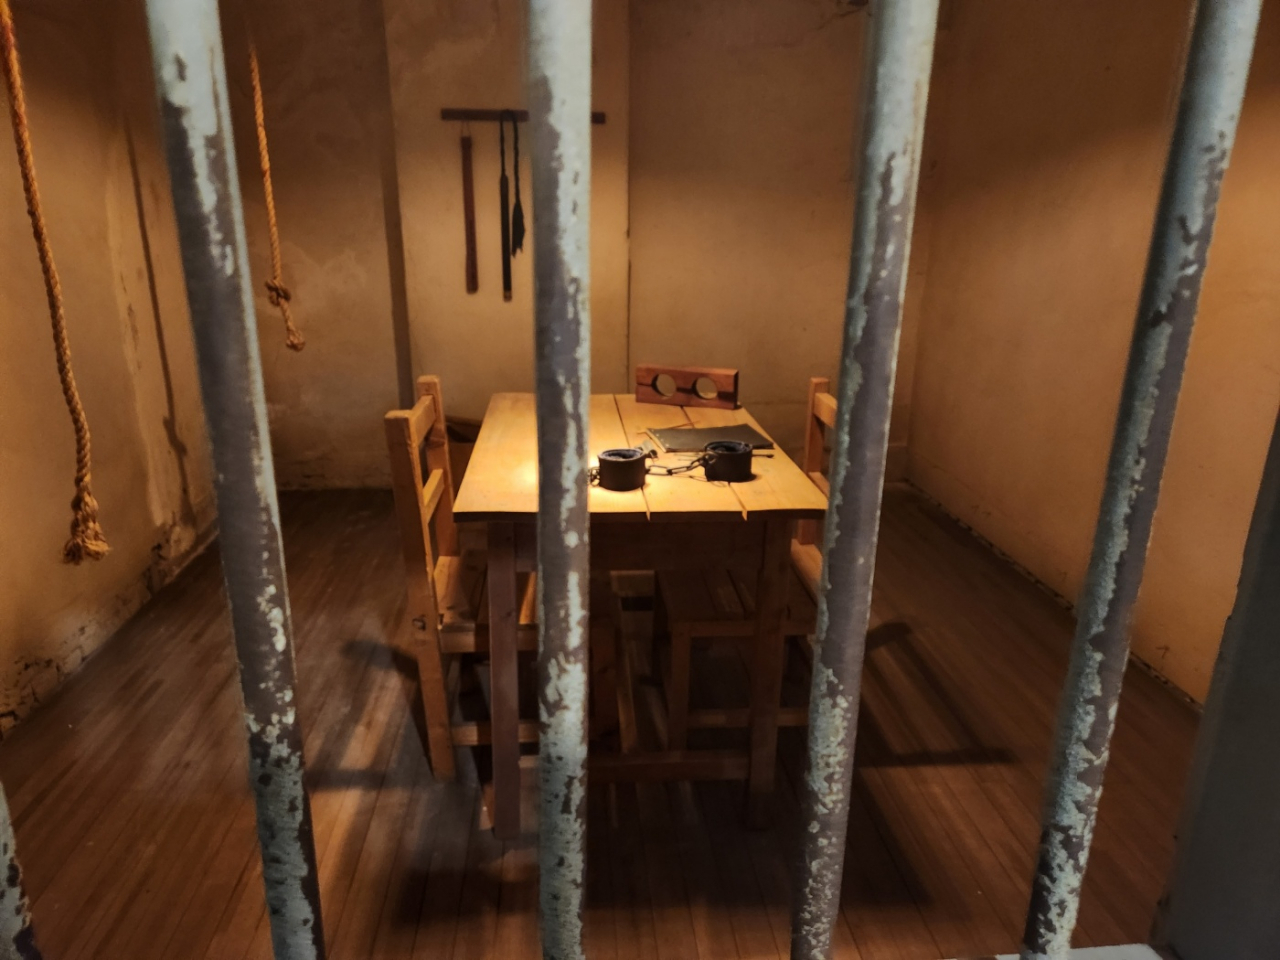 Props of torture devices that were used in the past are set up in interrogation rooms of Seodaemun Prison. (Yoon Min-sik/The Korea Herald)